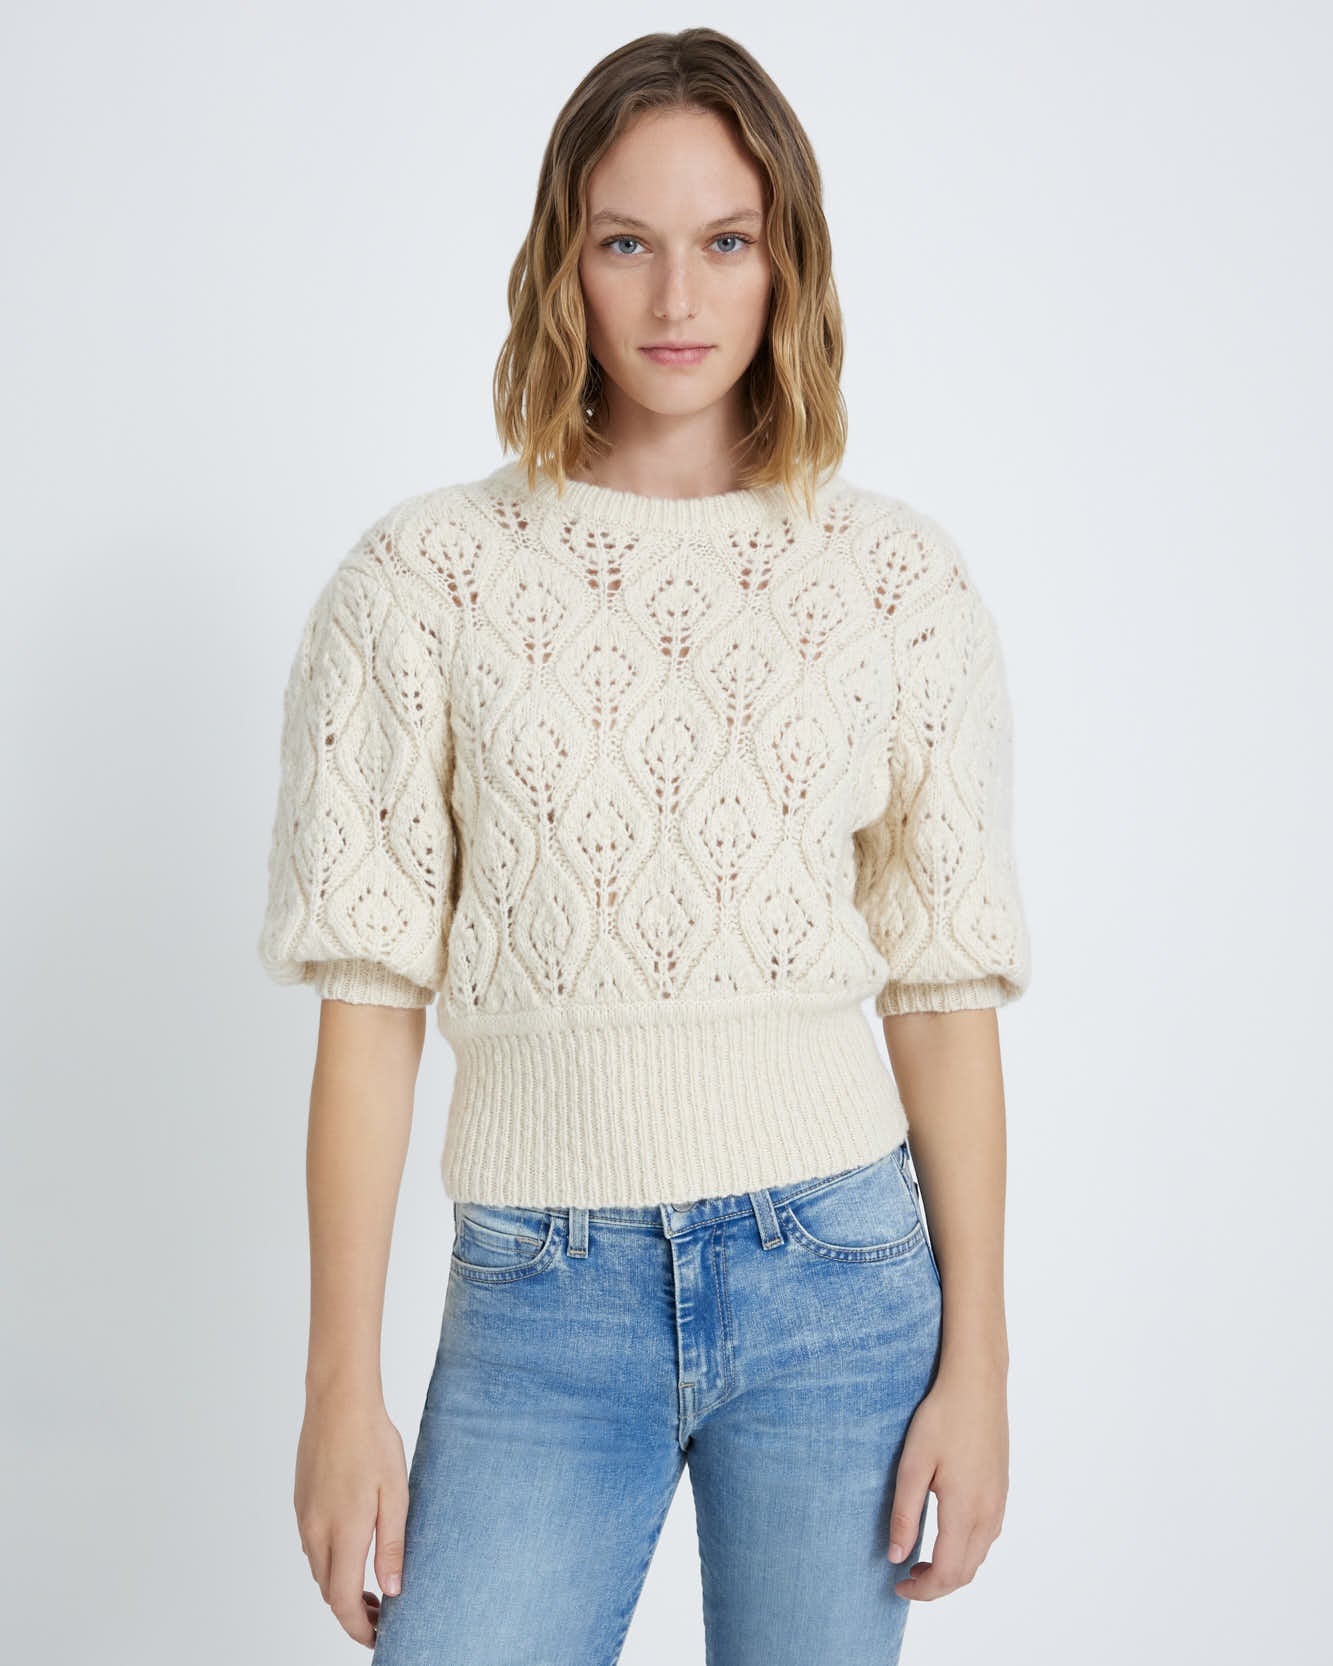 Pointelle Sweater in Cream | 7 For All Mankind